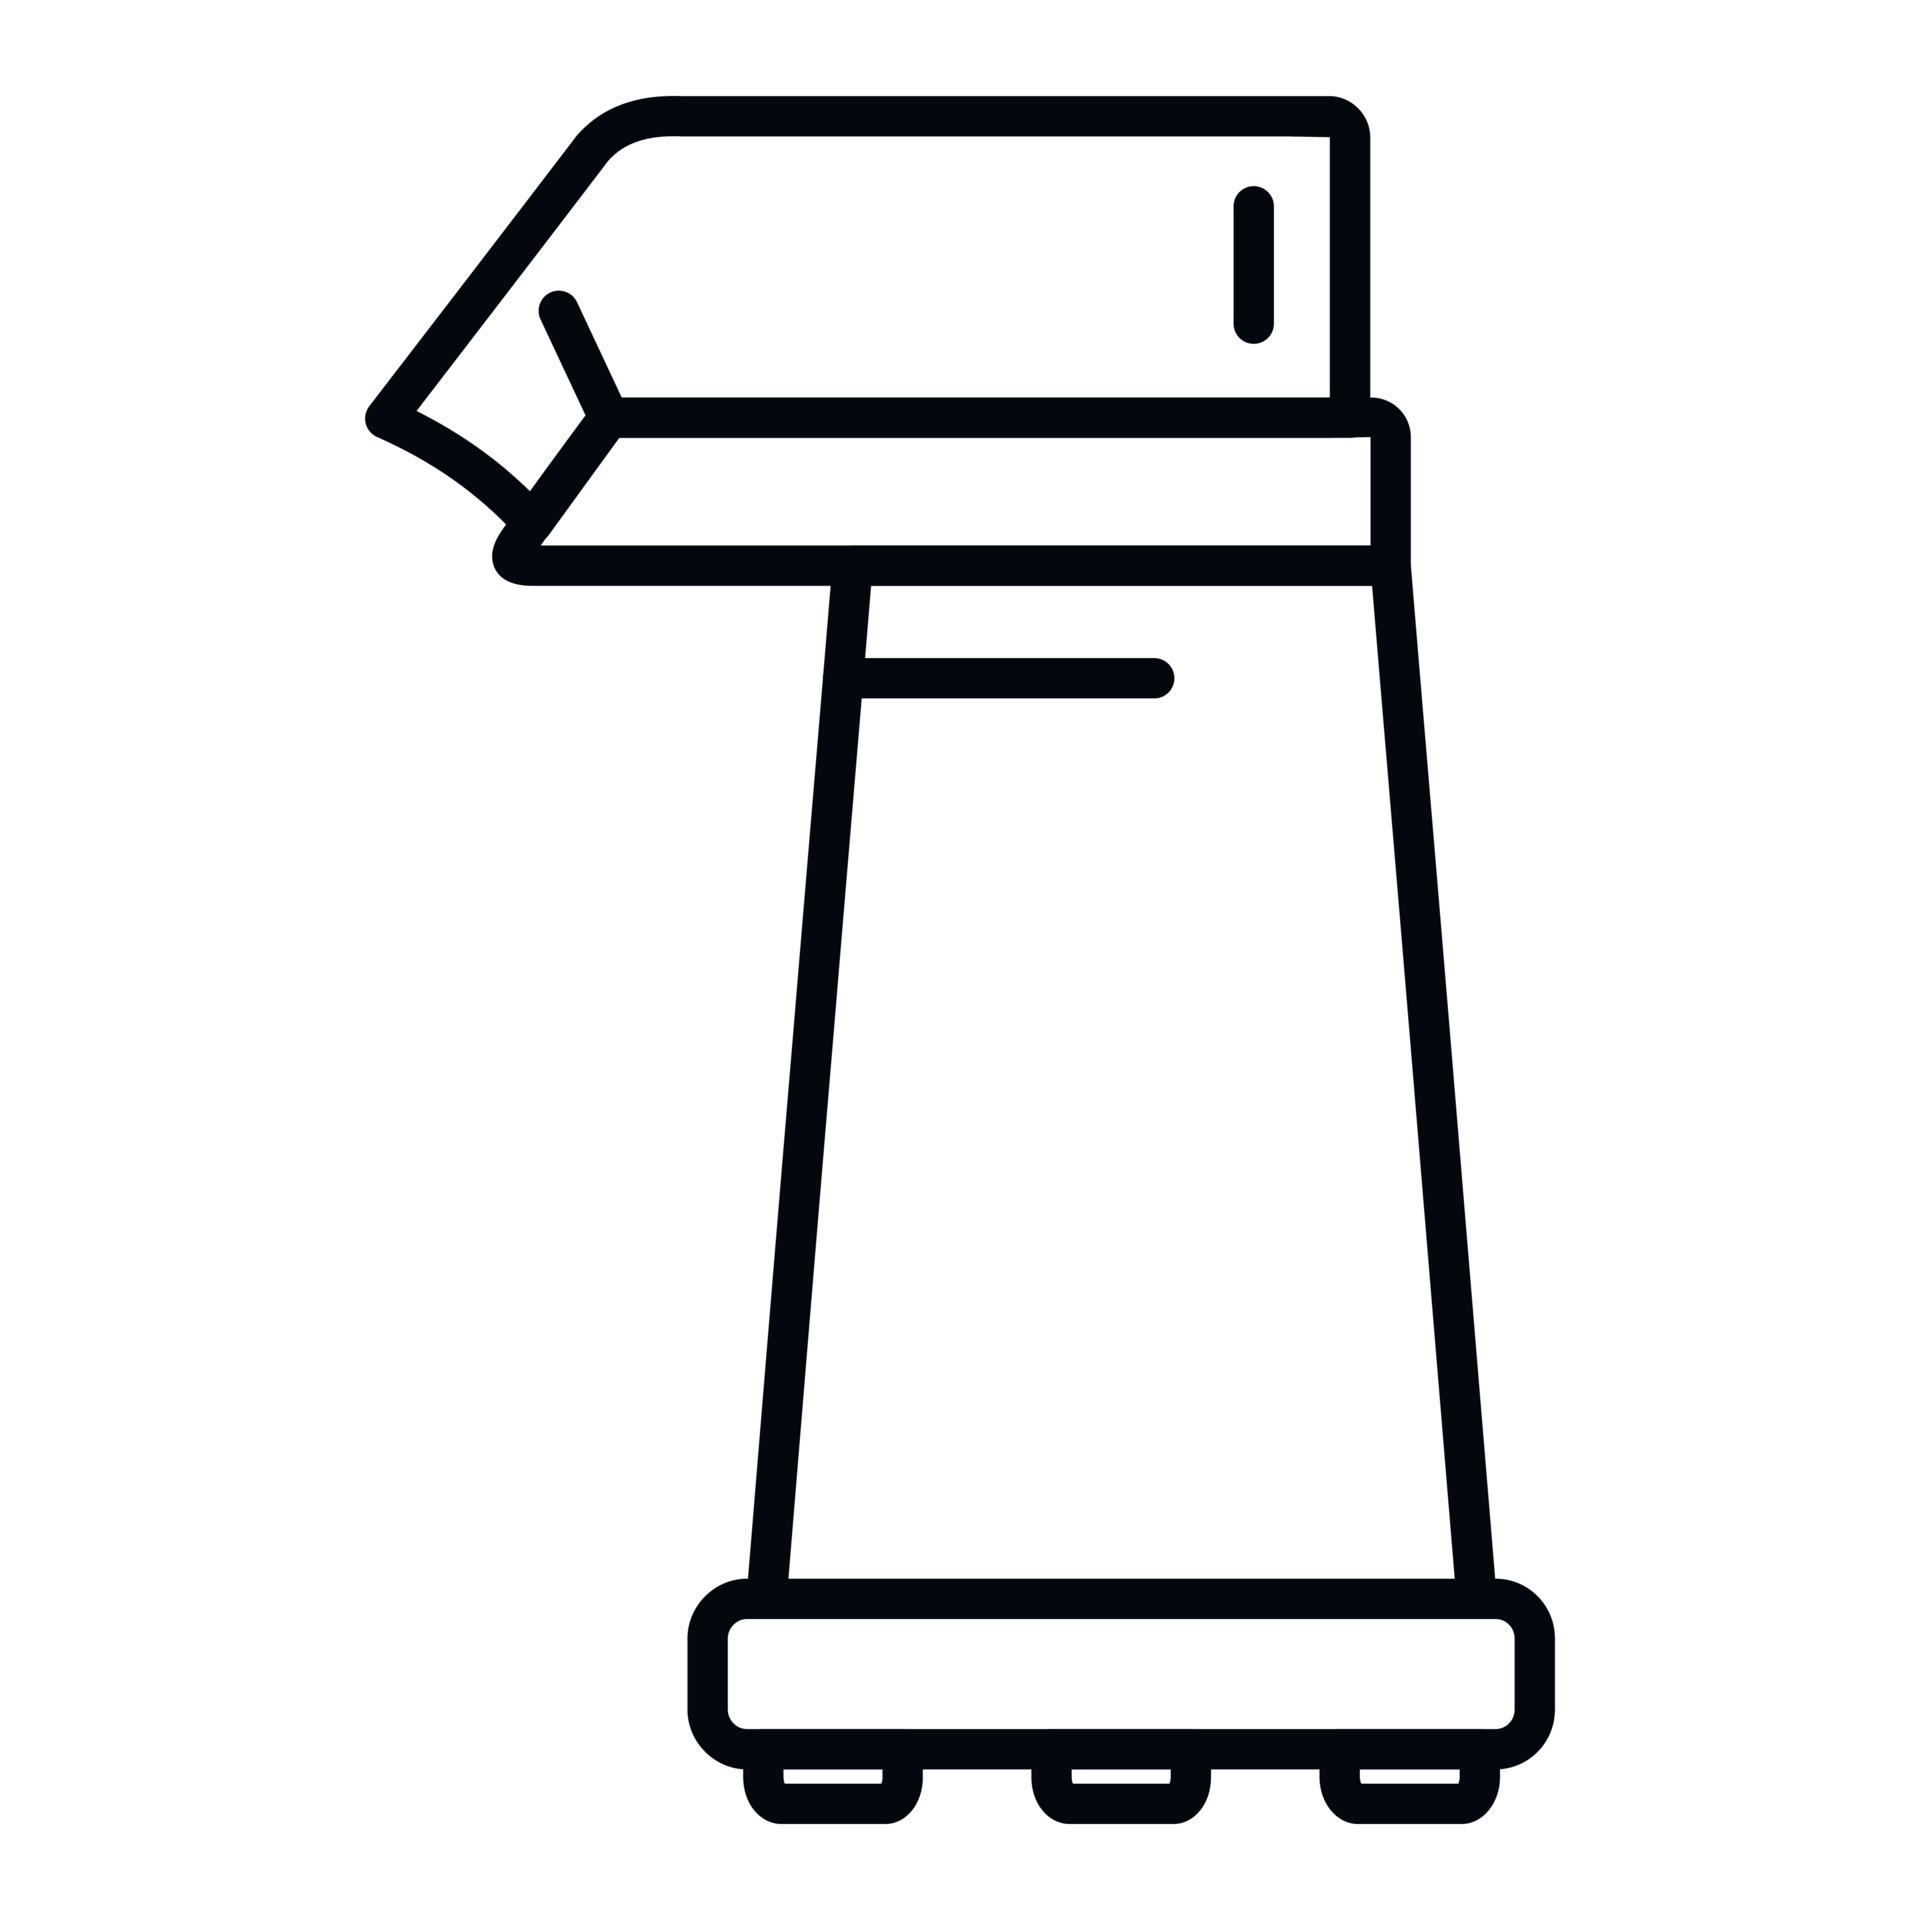 https://static.vecteezy.com/system/resources/previews/017/325/742/original/popcorn-tool-icon-outline-seller-cooking-vector.jpg